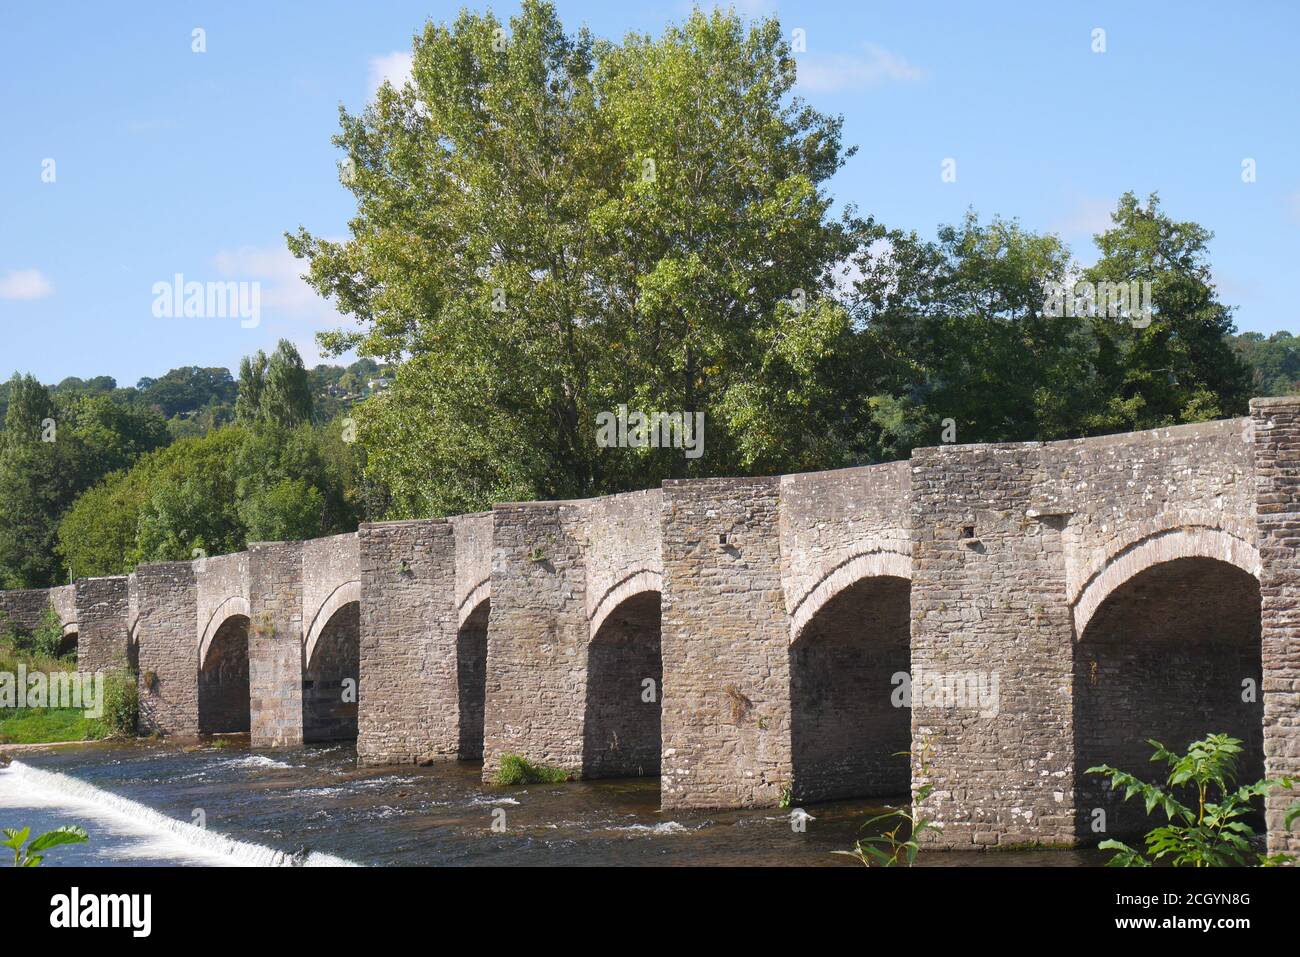 The grade 1 listed 18th century bridge, standing above a weir, across the River Usk, Crickhowell, Powys, Wales, United Kingdom Stock Photo